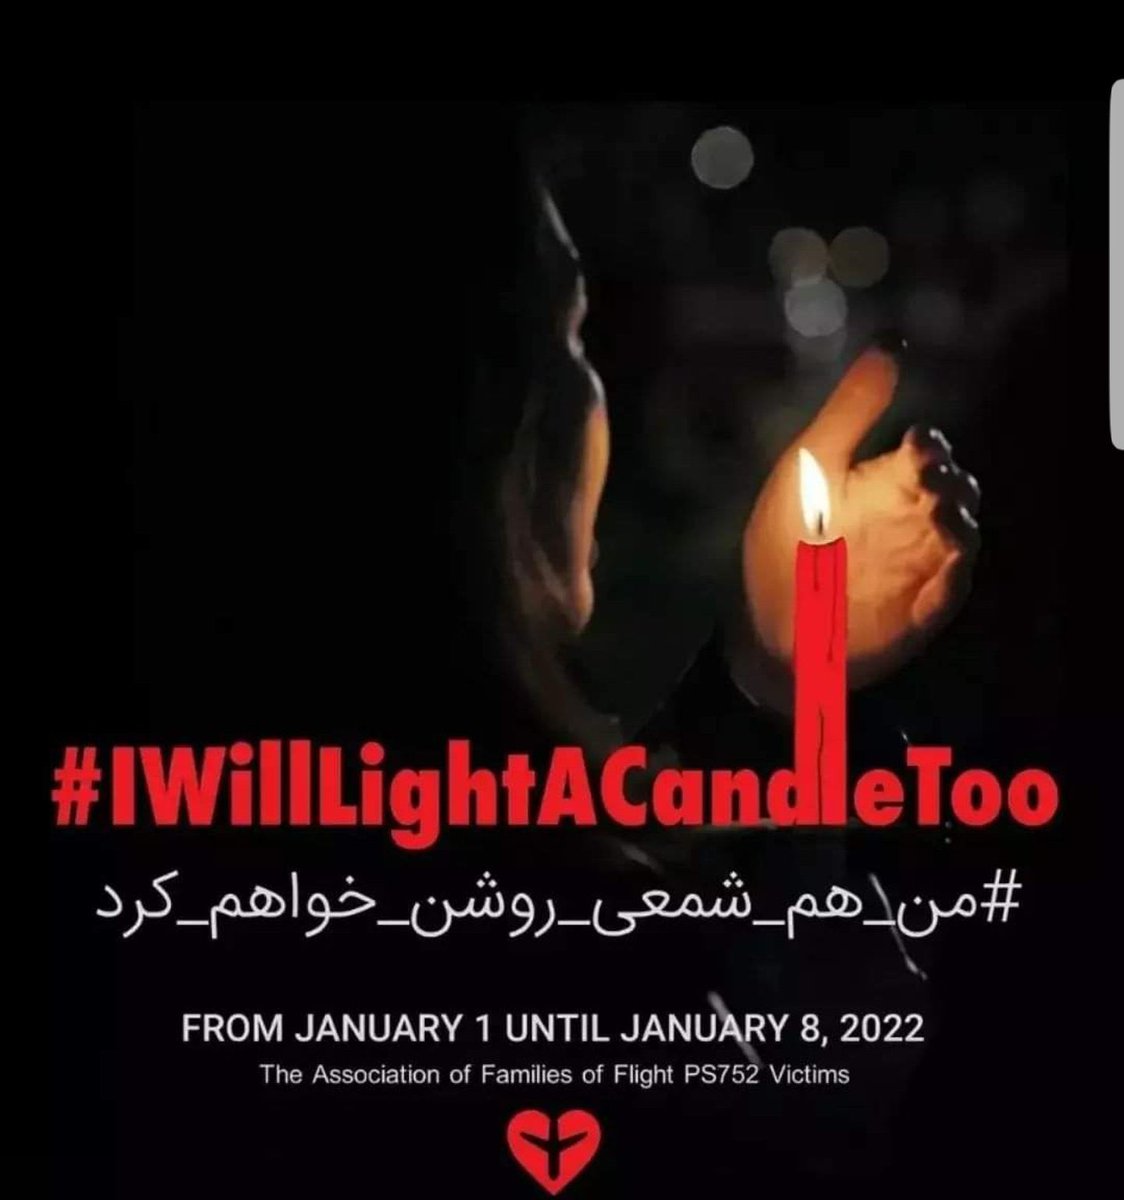 #IWillLightACandleToo: For the second anniversary of the downing of Flight PS752 in cold blood by the Iranian government